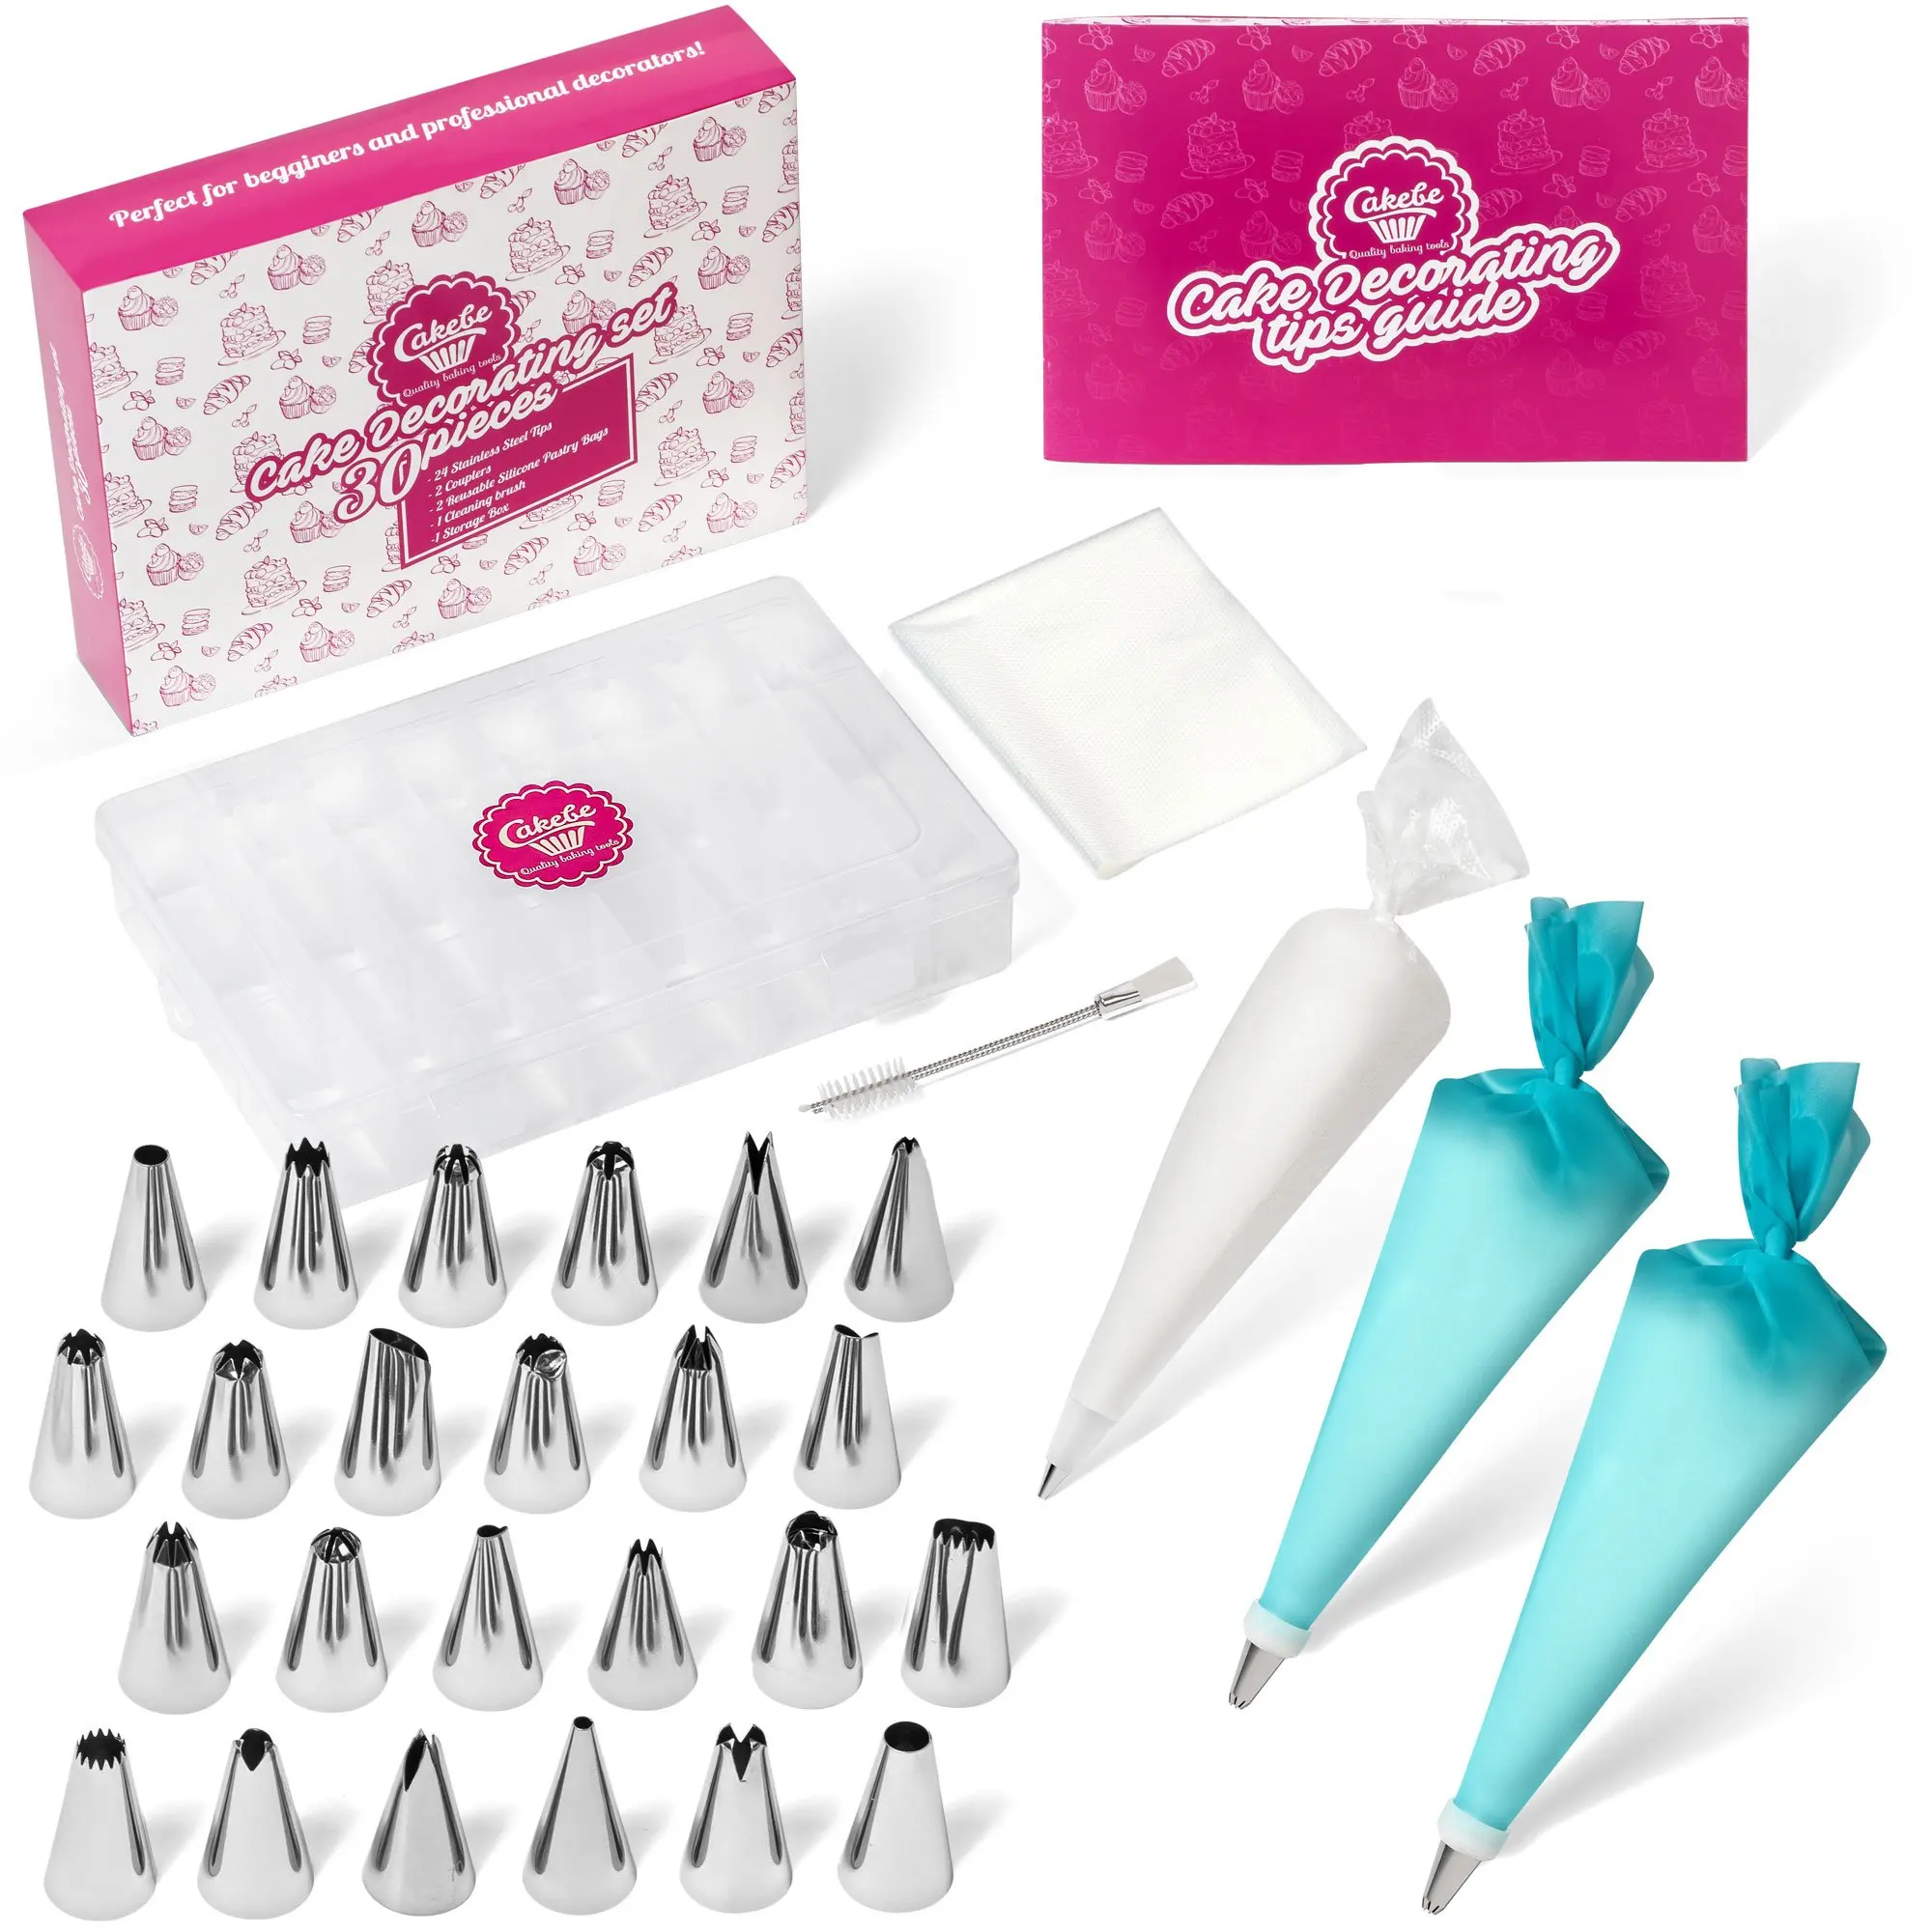 Kit with Piping Bags and Tips, 24 Icing Tips, 10 Pastry Bags, 2 Silicone Ic...